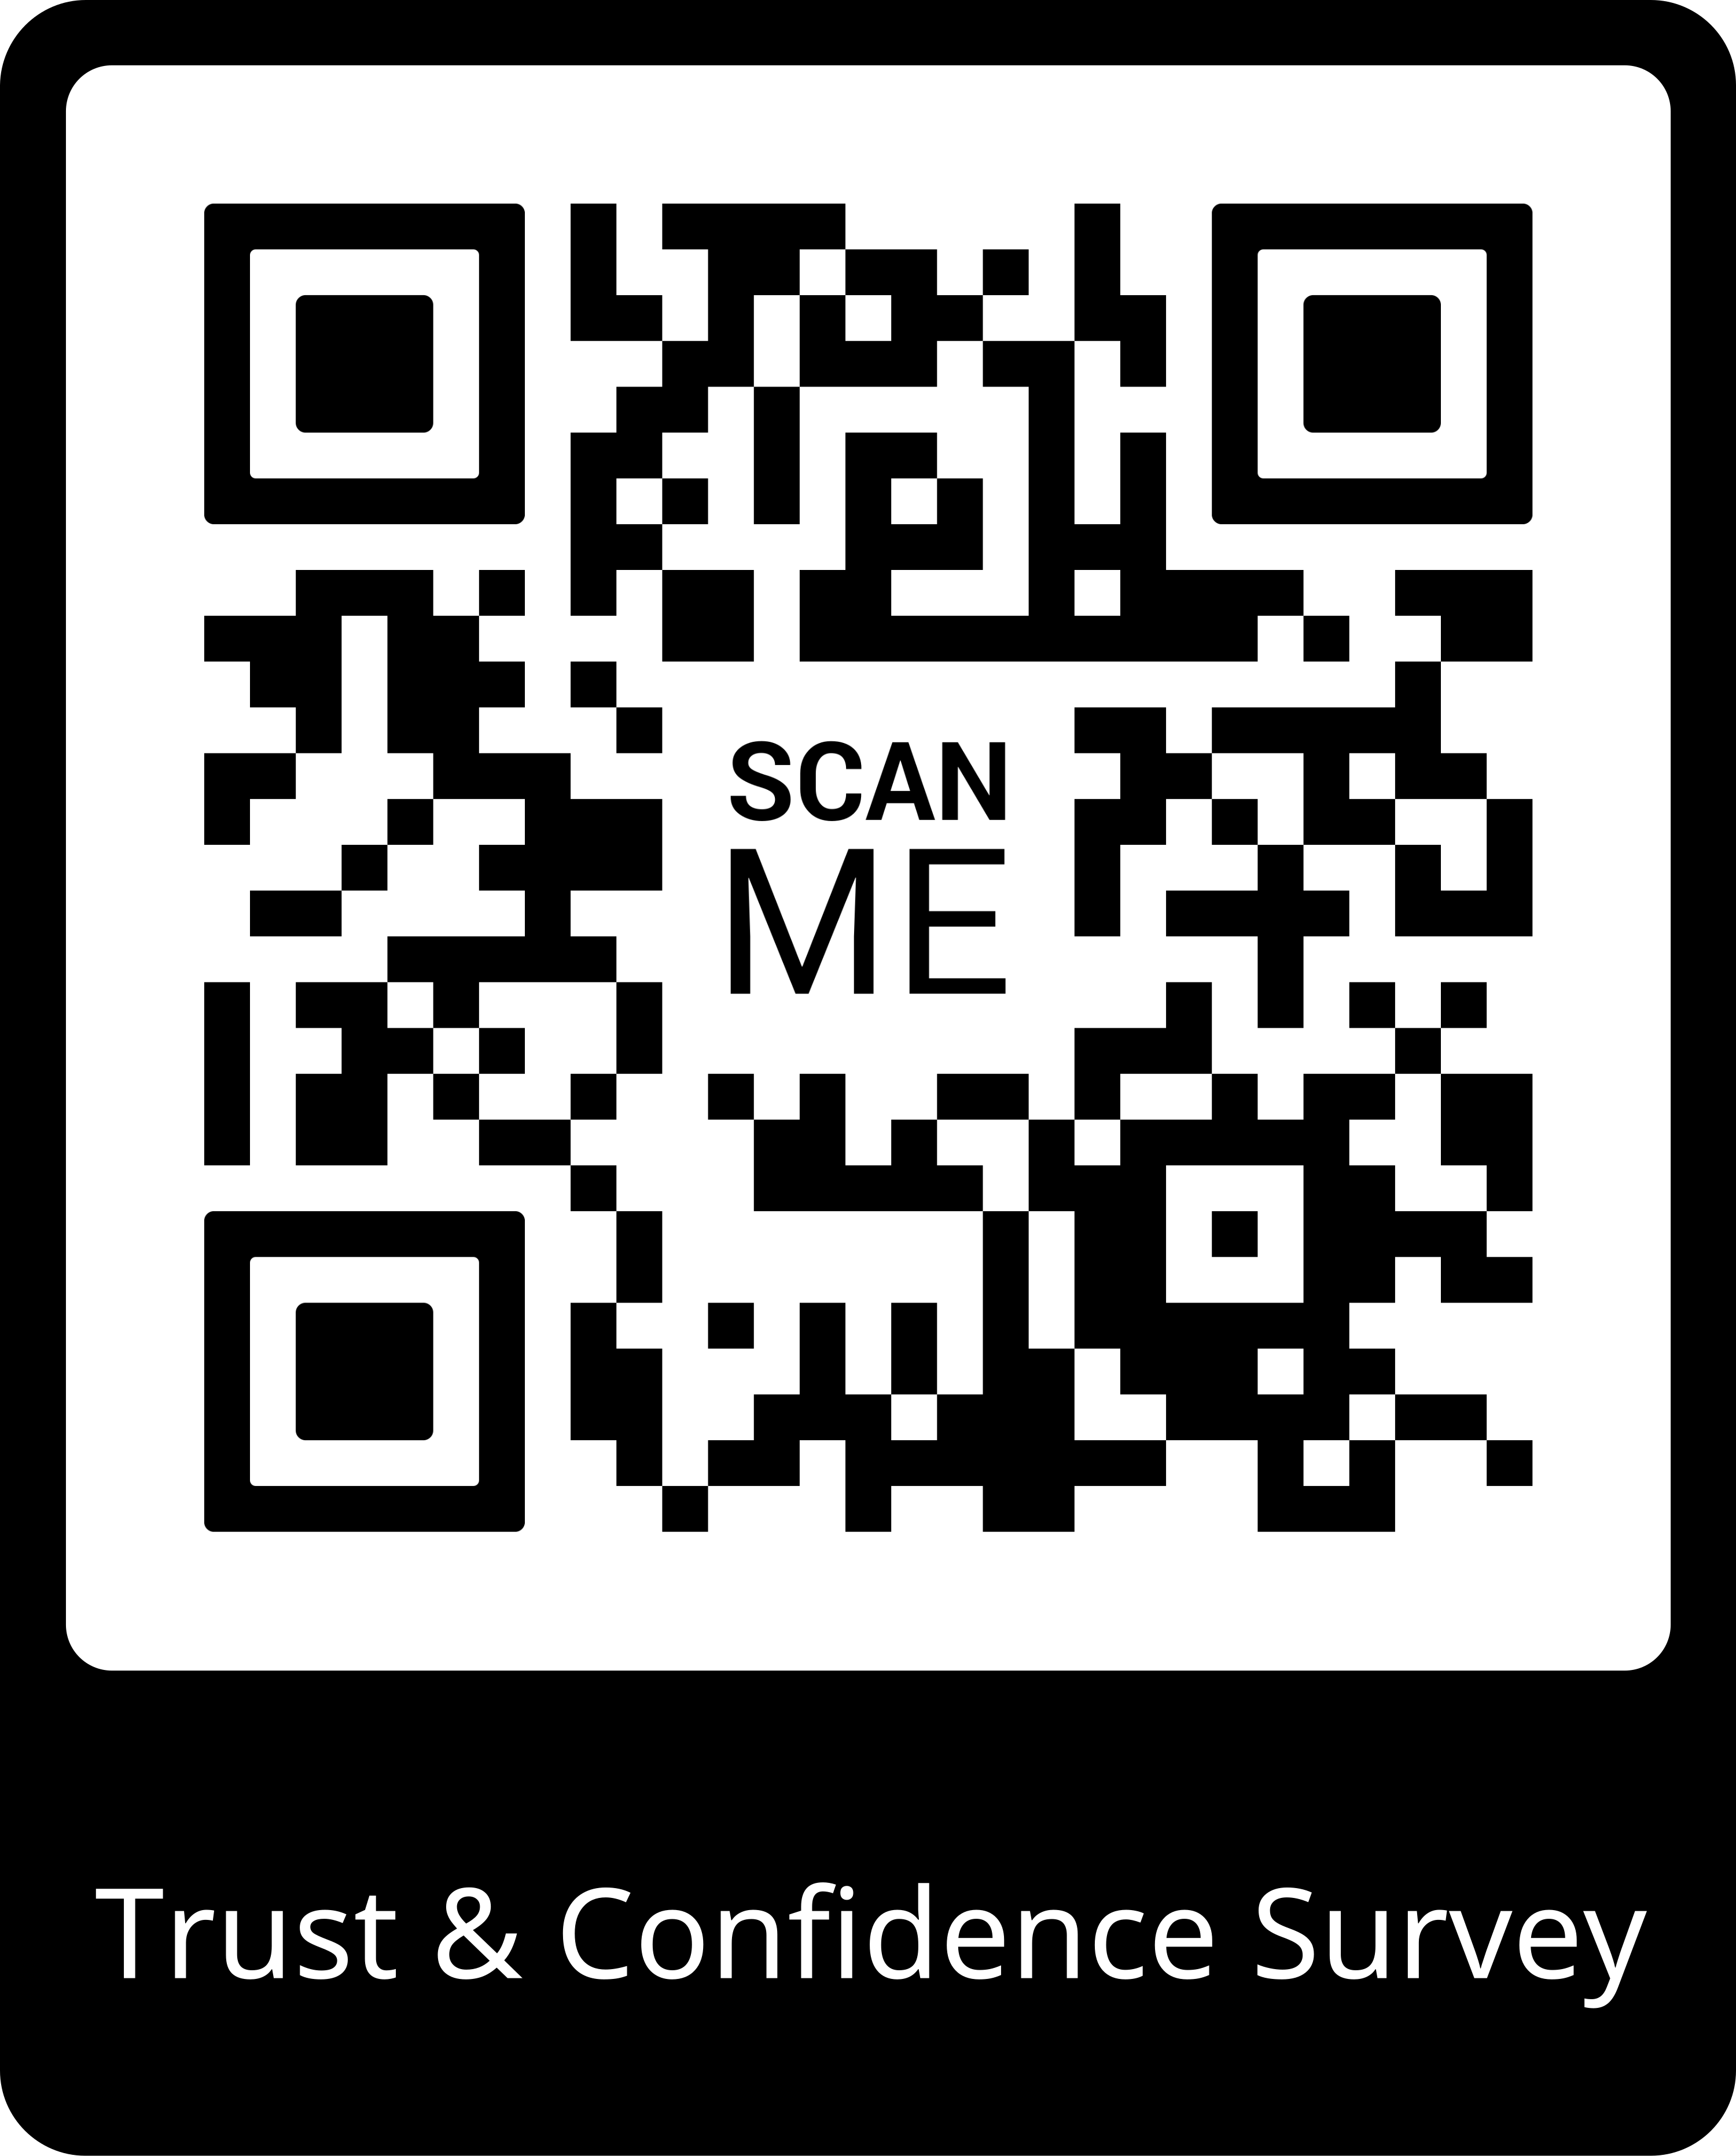 QR Code - Scan to start the Trust and Confidence Survey